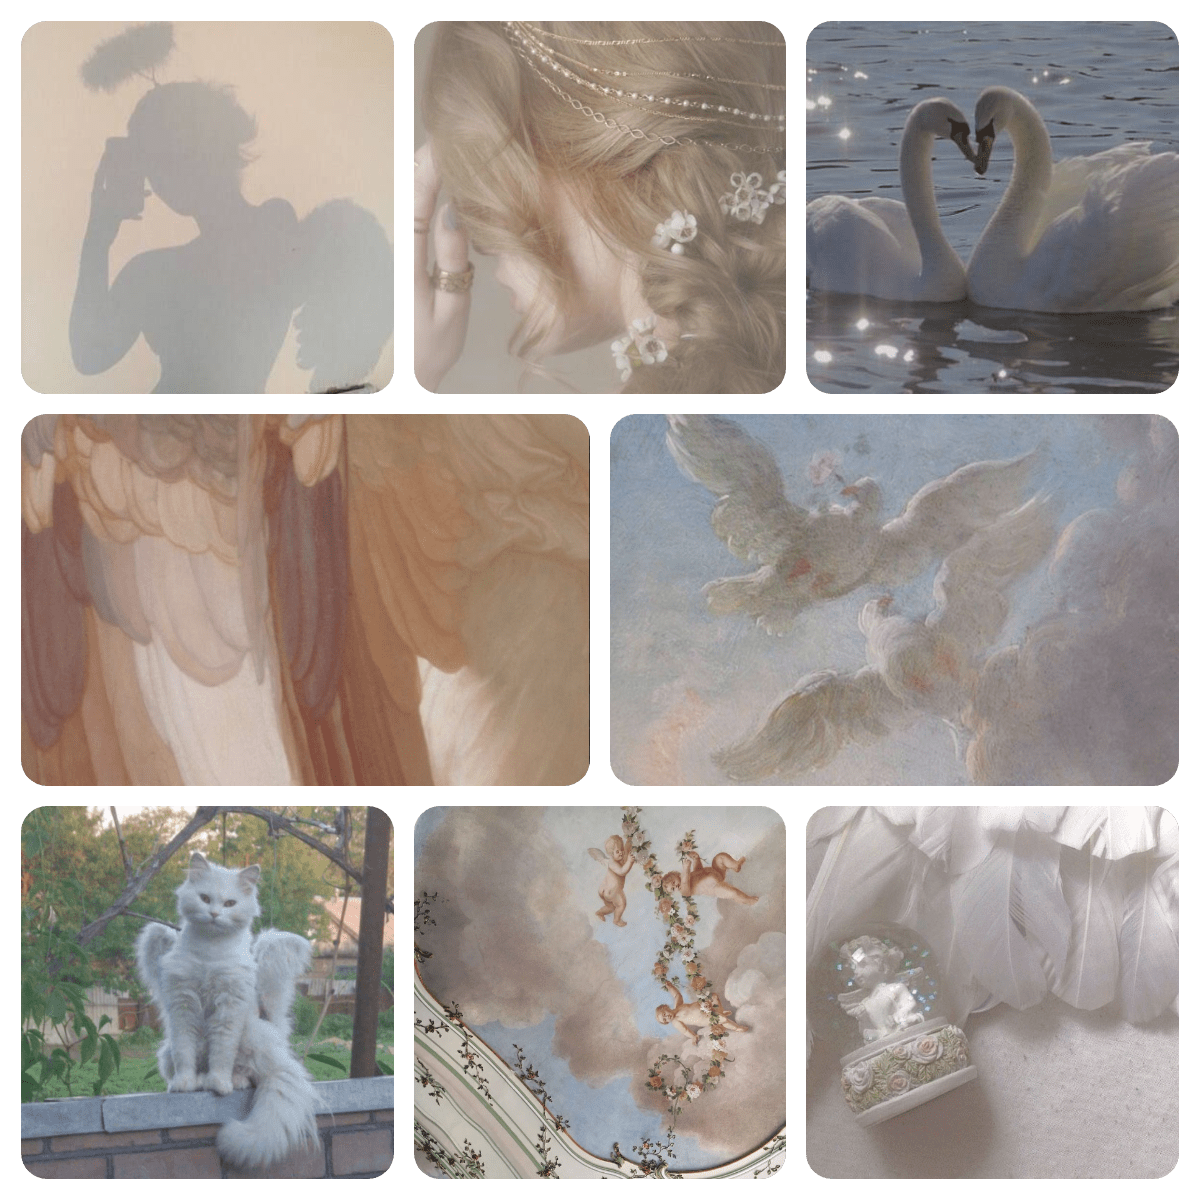 A collage of nine different pictures, including swans, a cat, and angels. - Angelcore